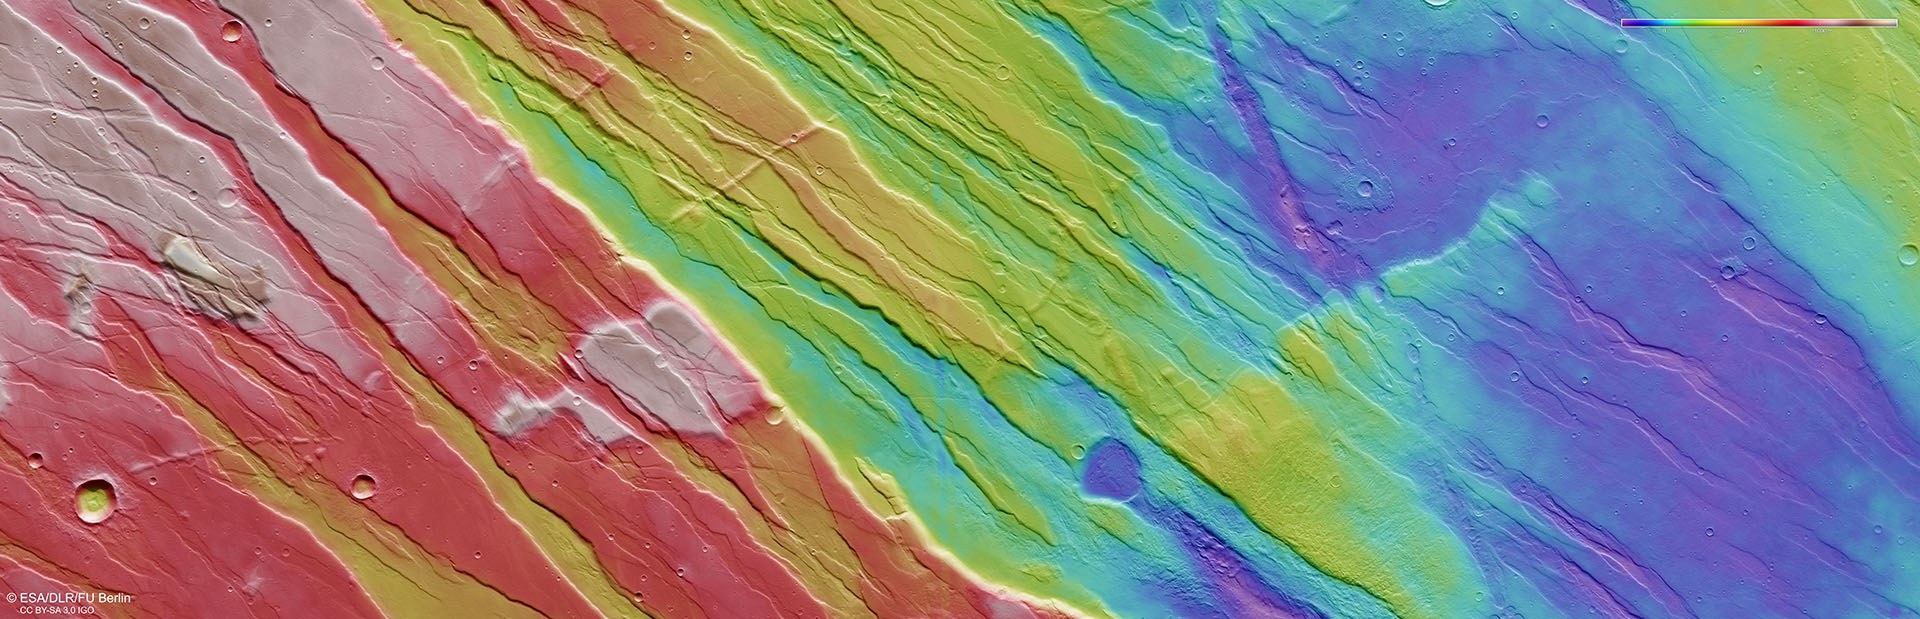 Topographic image map of the tectonic structures of Ascuris Planum